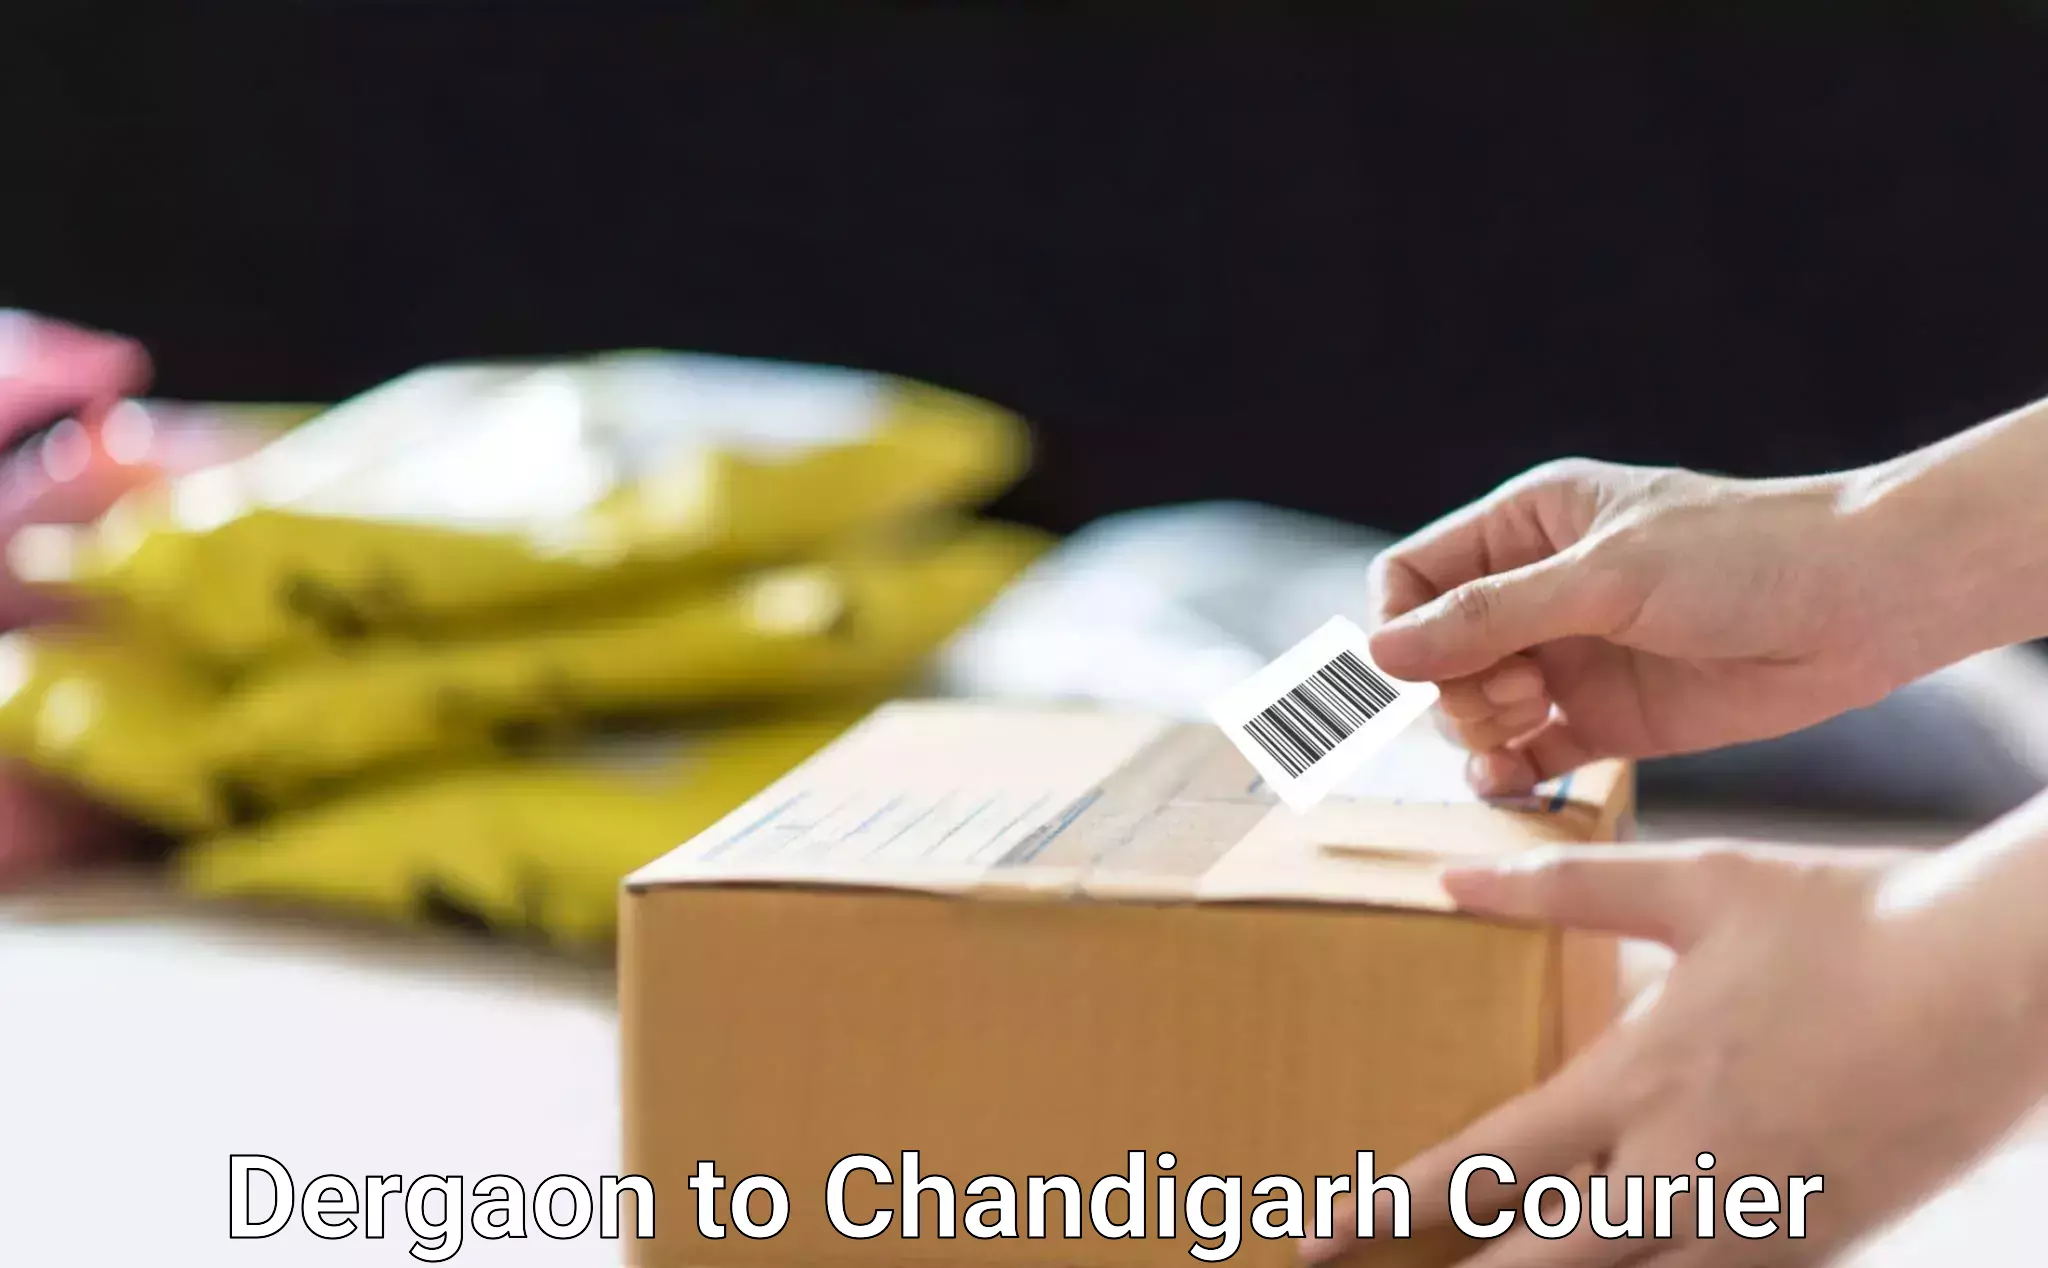 Fast delivery service Dergaon to Panjab University Chandigarh